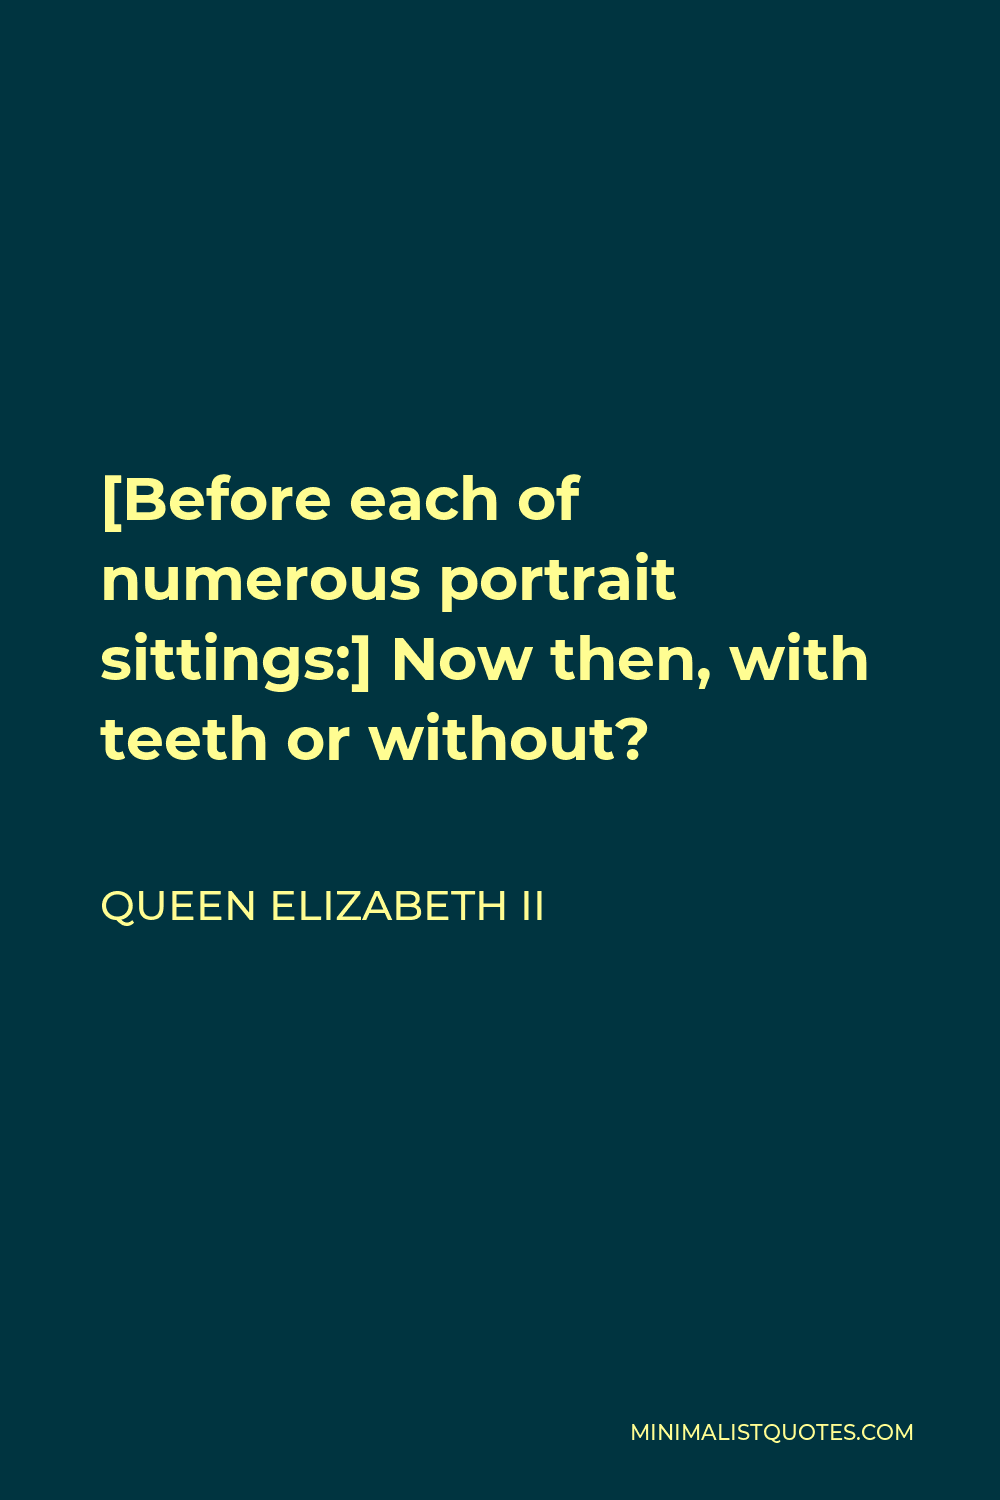 Queen Elizabeth II Quote - [Before each of numerous portrait sittings:] Now then, with teeth or without?